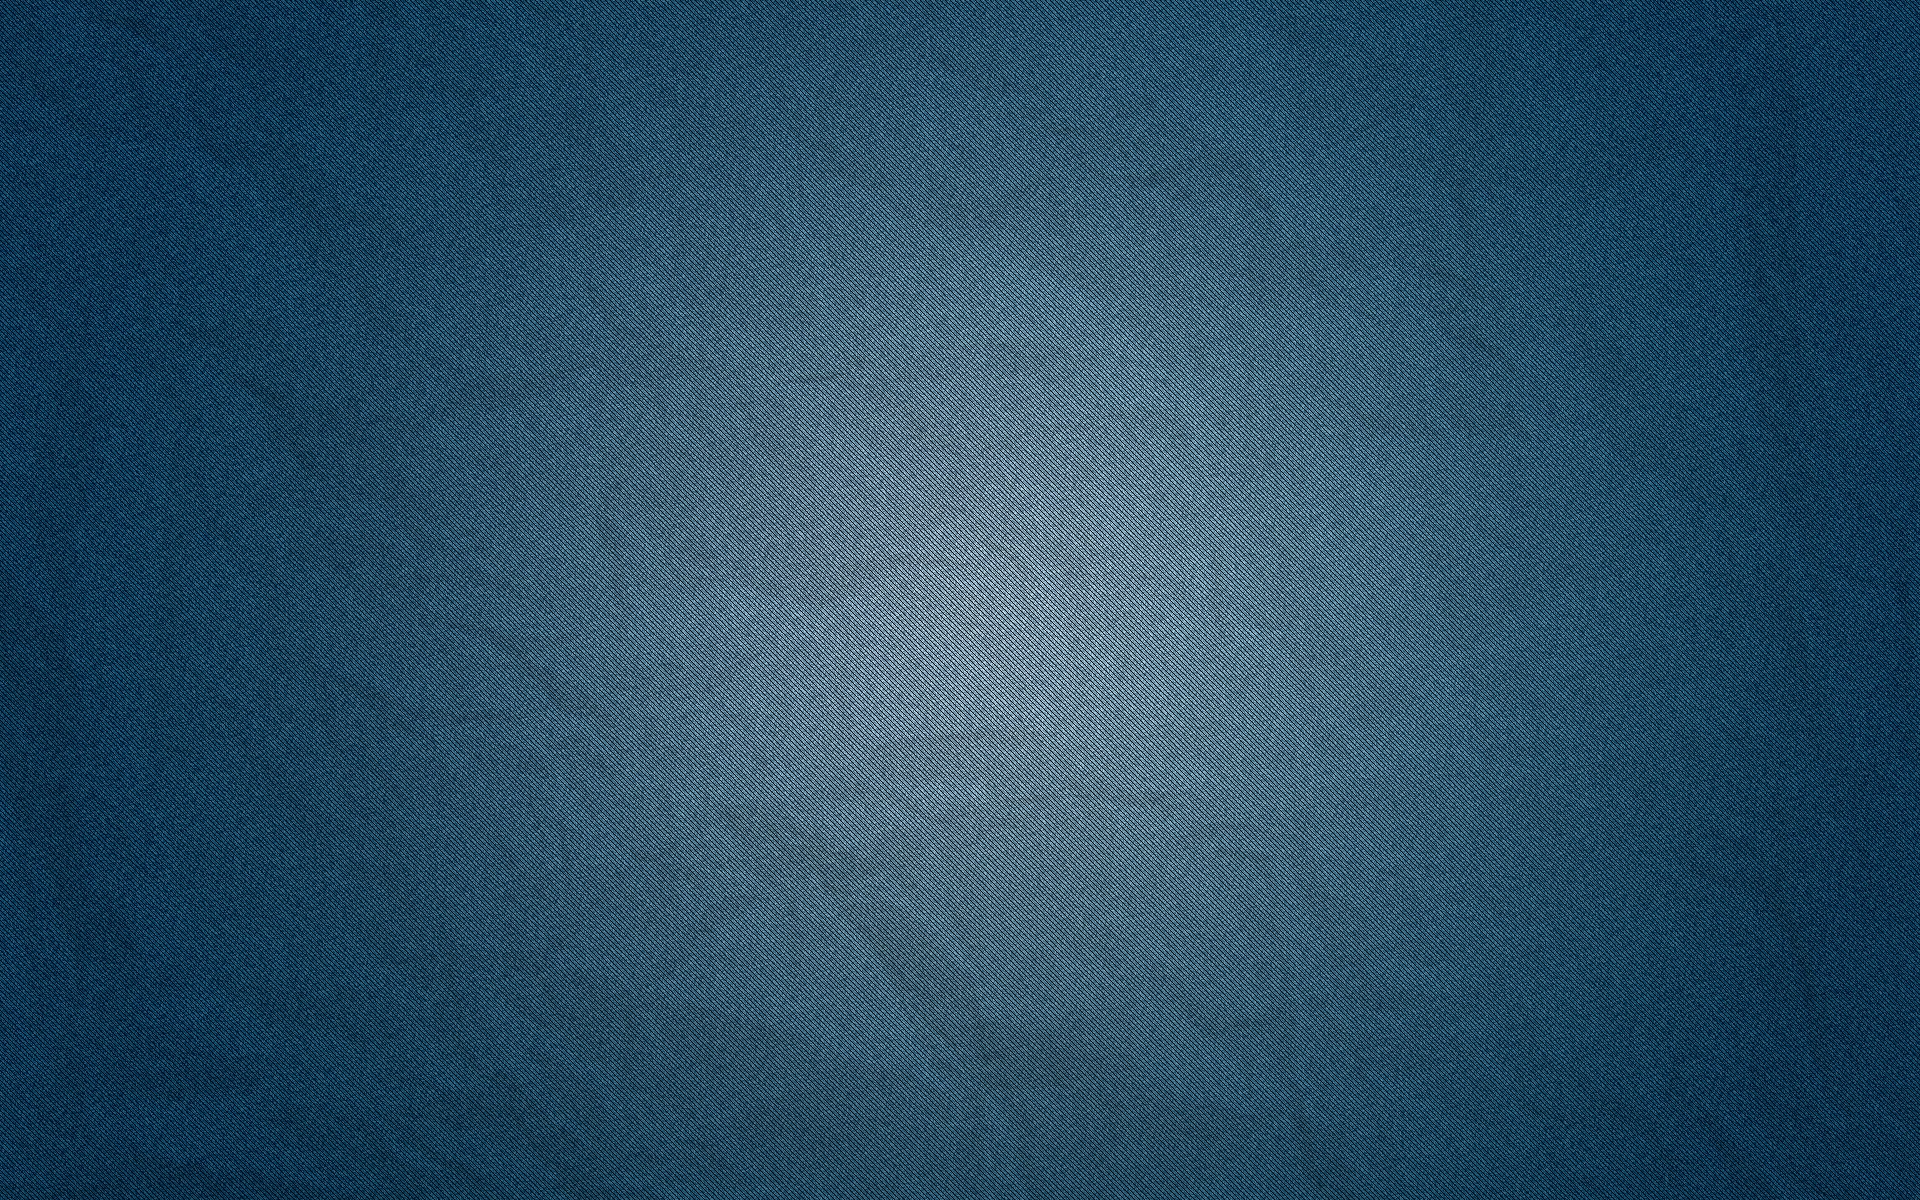 #blue, #simple, #texture, #gradient, #abstract